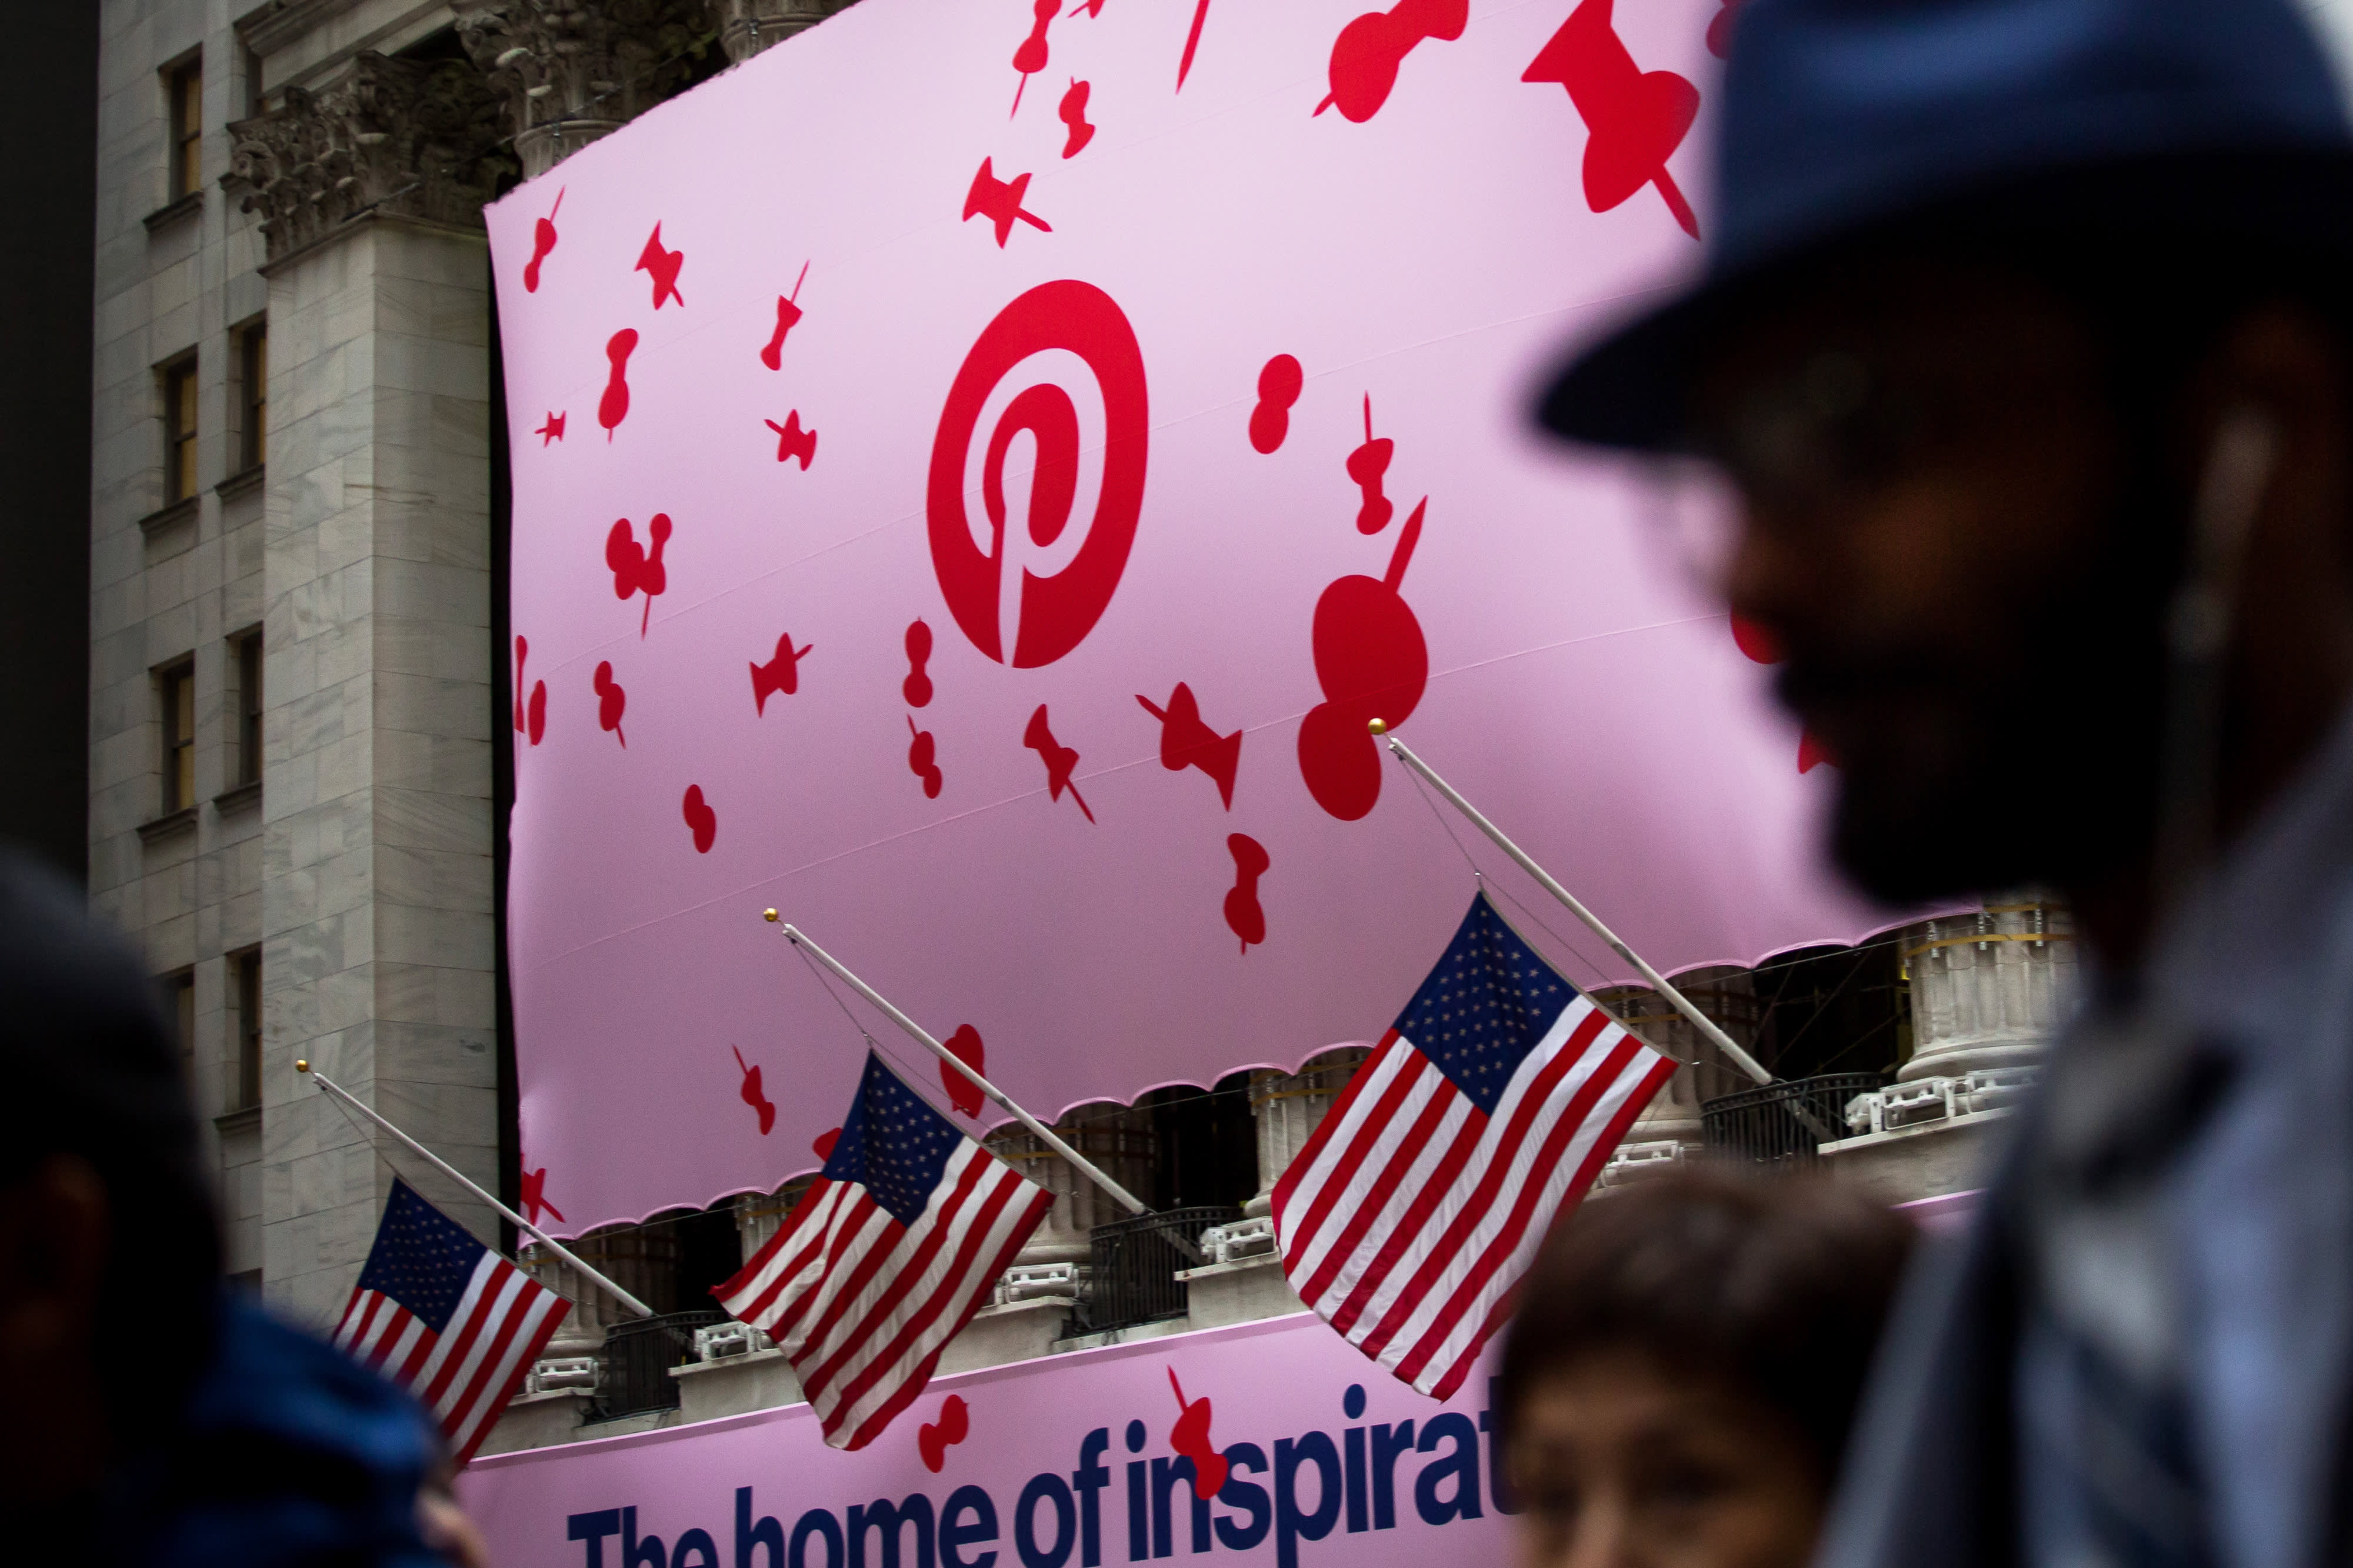 Pinterest shares continue to fall following decline in users